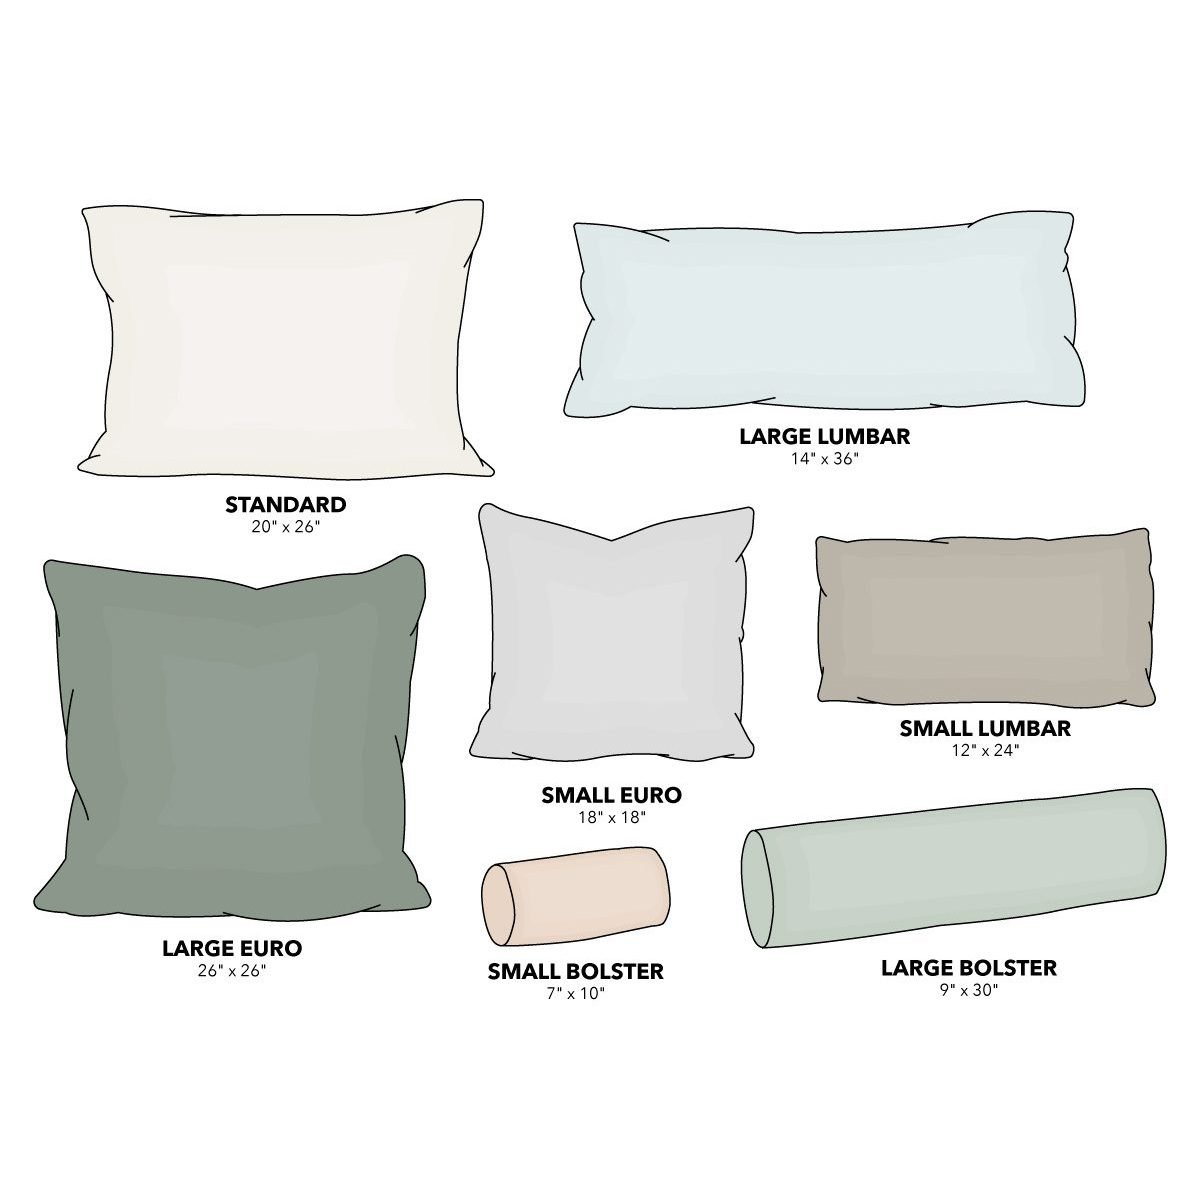 How to Style Pillows on a Bed 3 Different Ways 